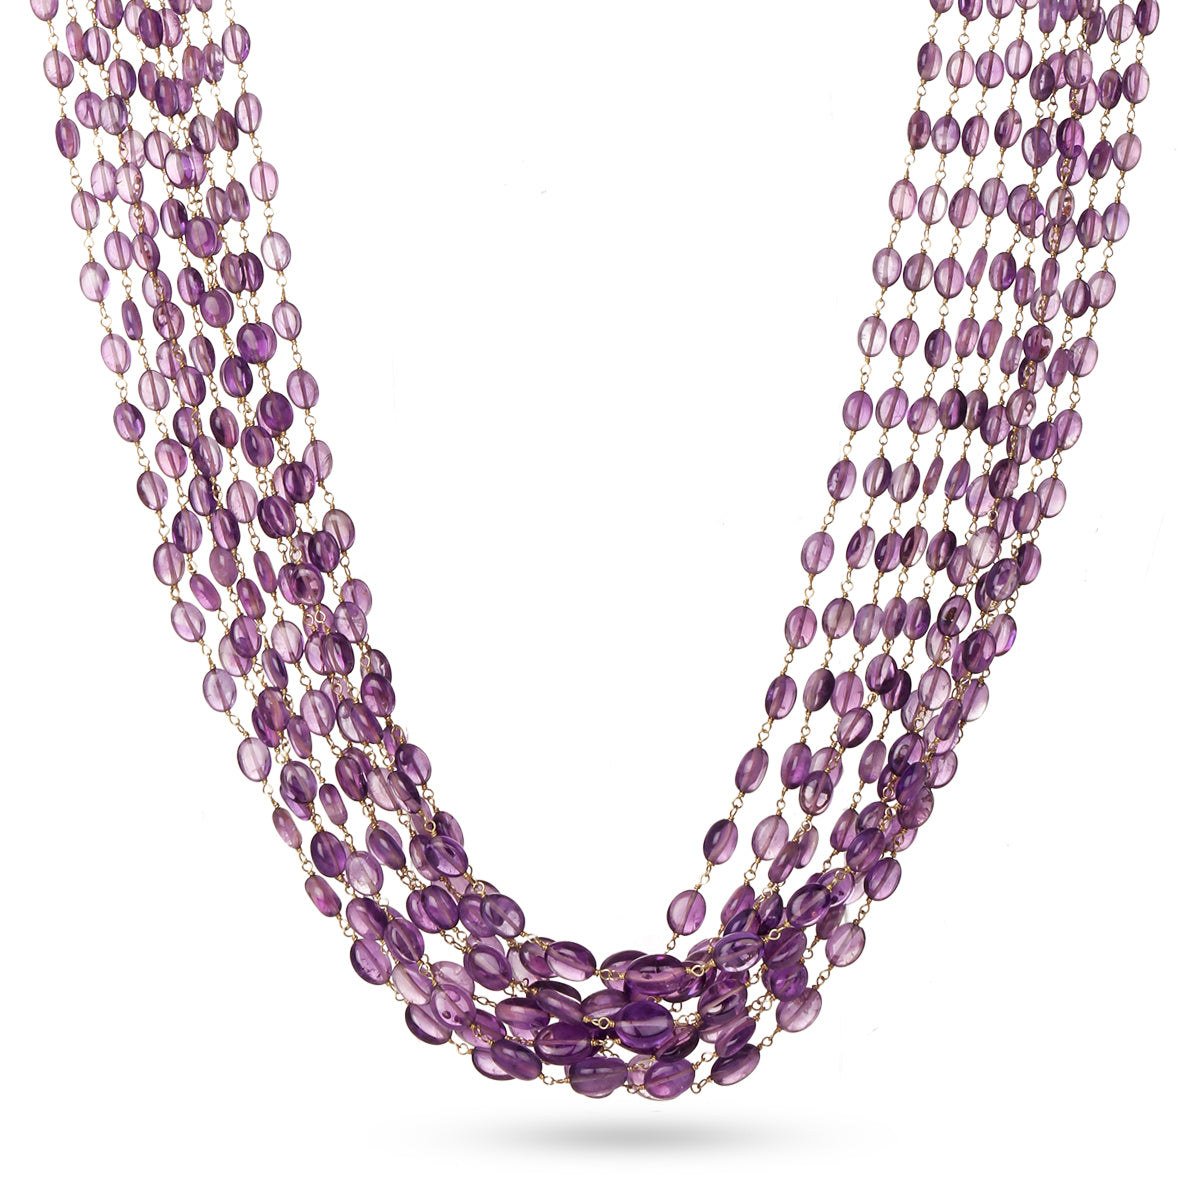 Meredith Strauss - Beaded Necklace with Grape Motif - Blackberry